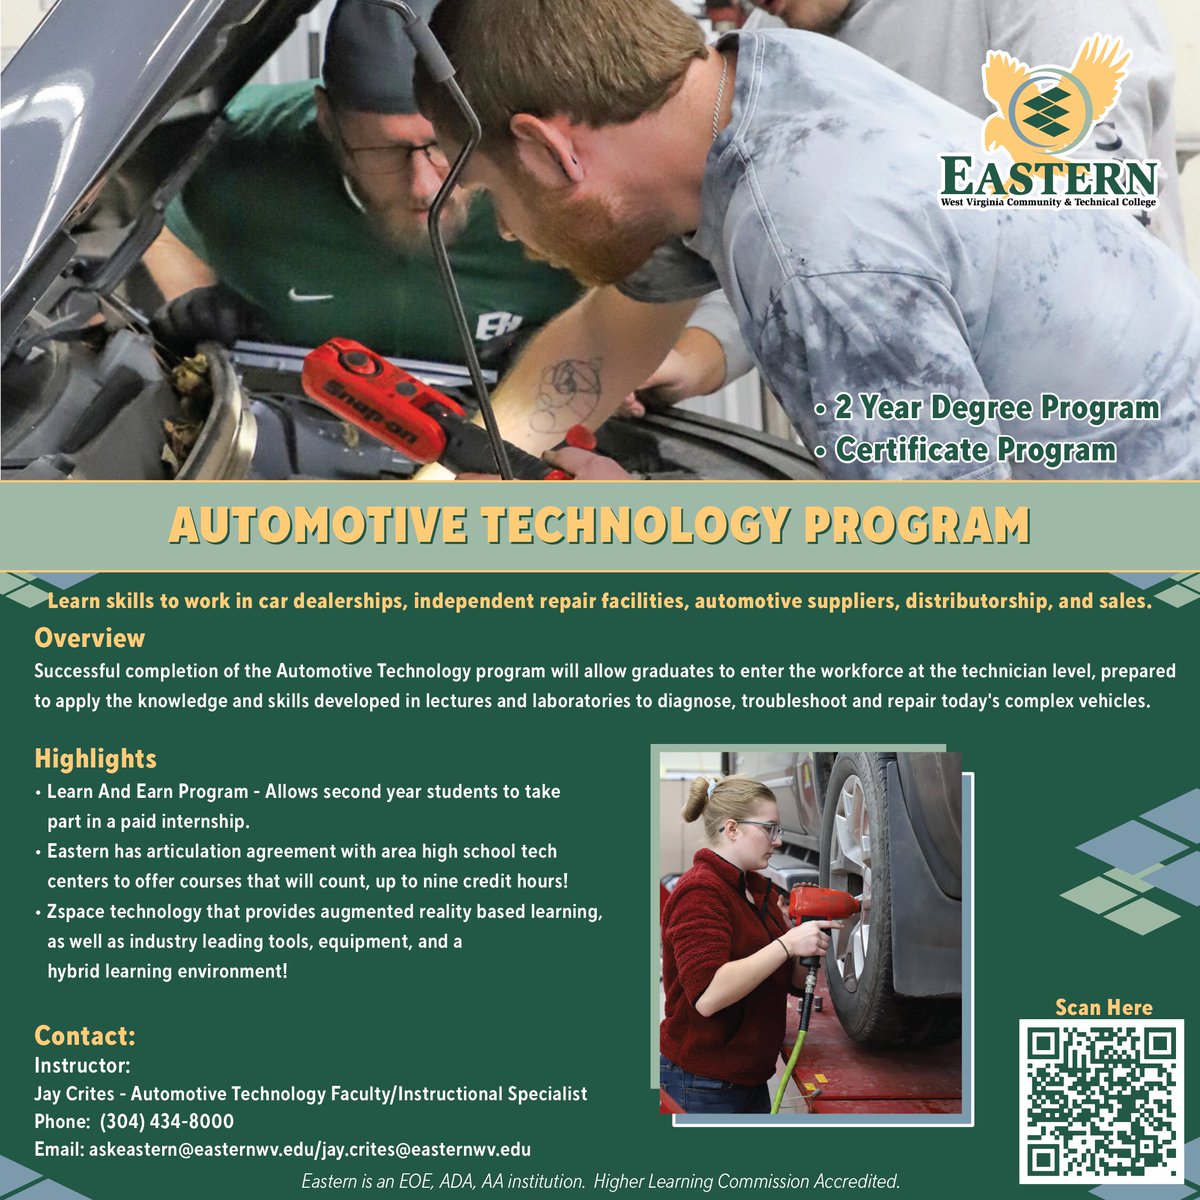 Want to learn the skills needed for car dealerships, repair facilities, and more? Enroll for the #EasternWV Auto Tech program this Fall! Learn more at easternwv.edu/academics/auto…
Call 304-434-8000 or email askeastern@easternwv.edu.
#DiscoverEWV #EasternWV #AutoTech #westvirginia